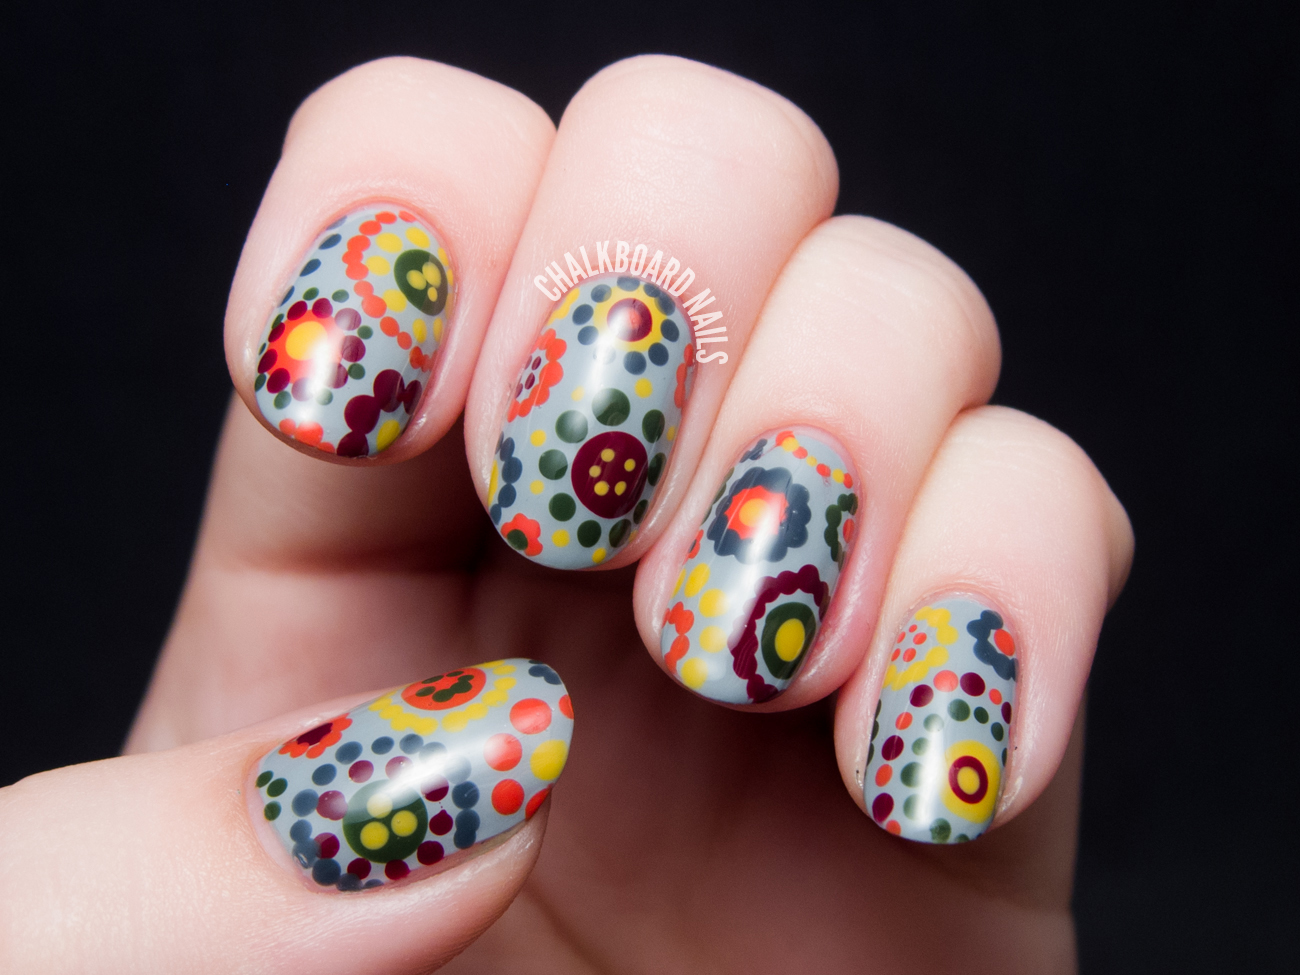 70's dotted floral nail art by @chalkboardnails